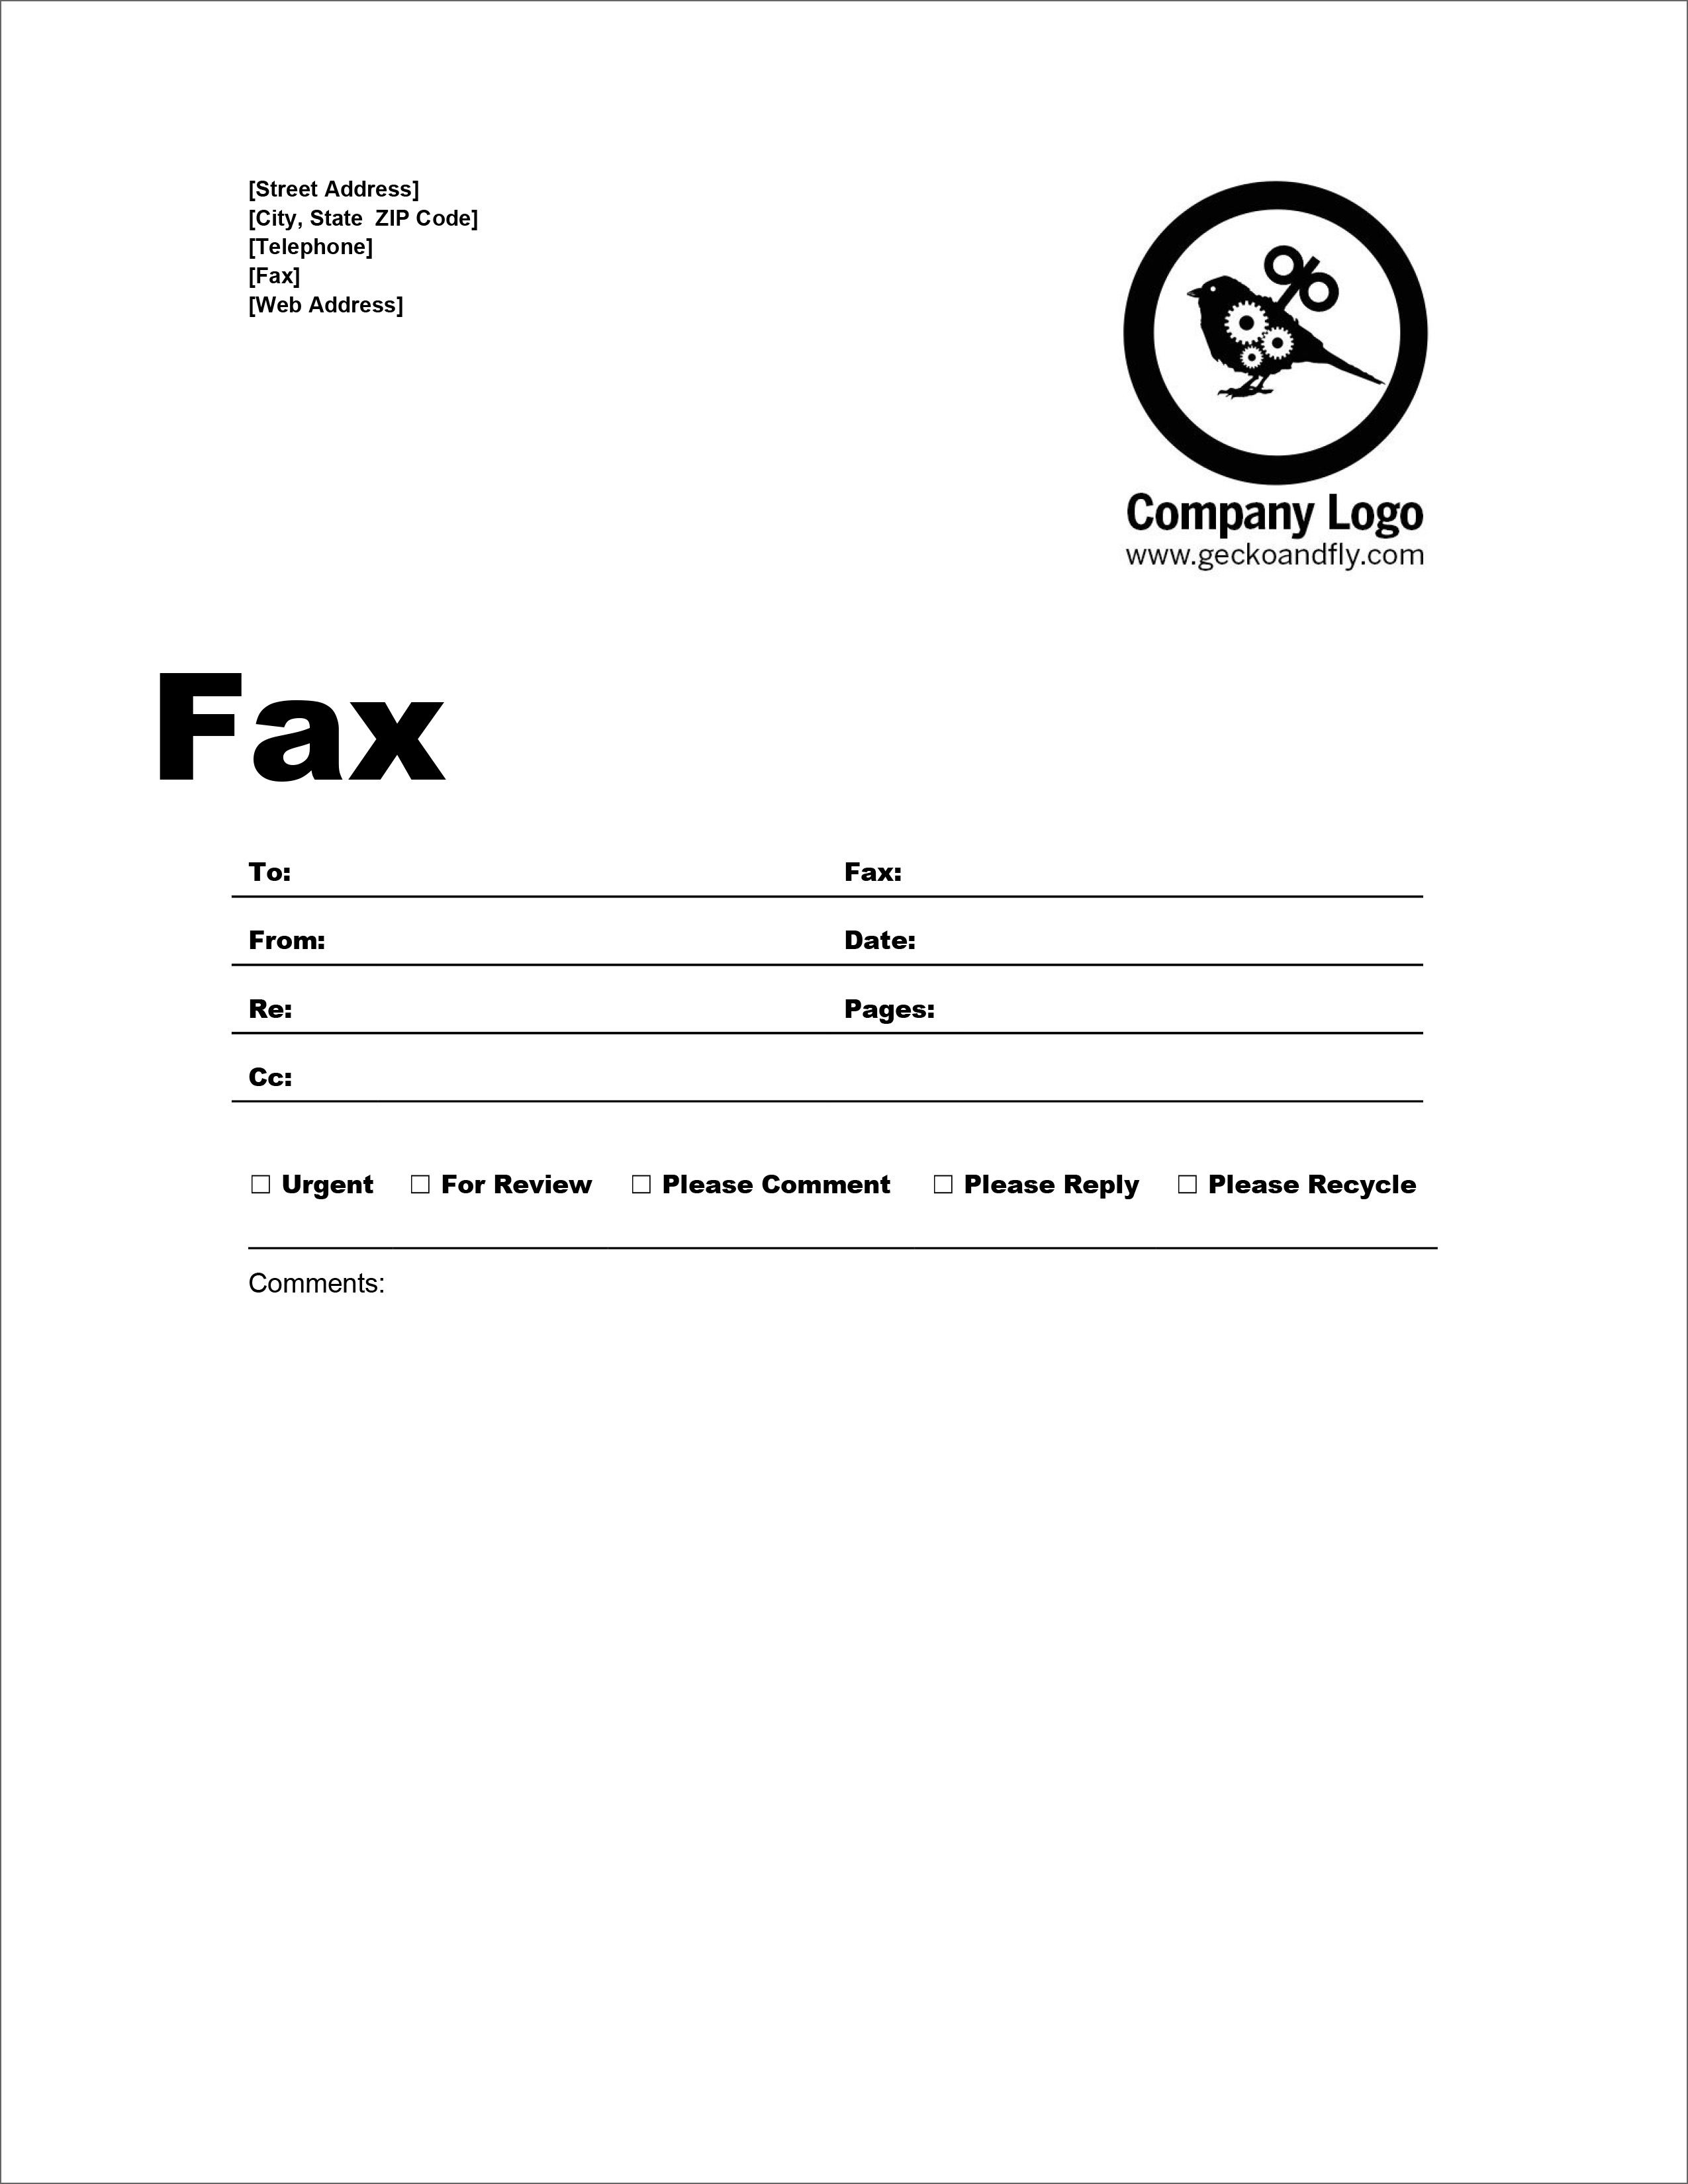 printable-fax-cover-sheet-template-free-aulaiestpdm-blog